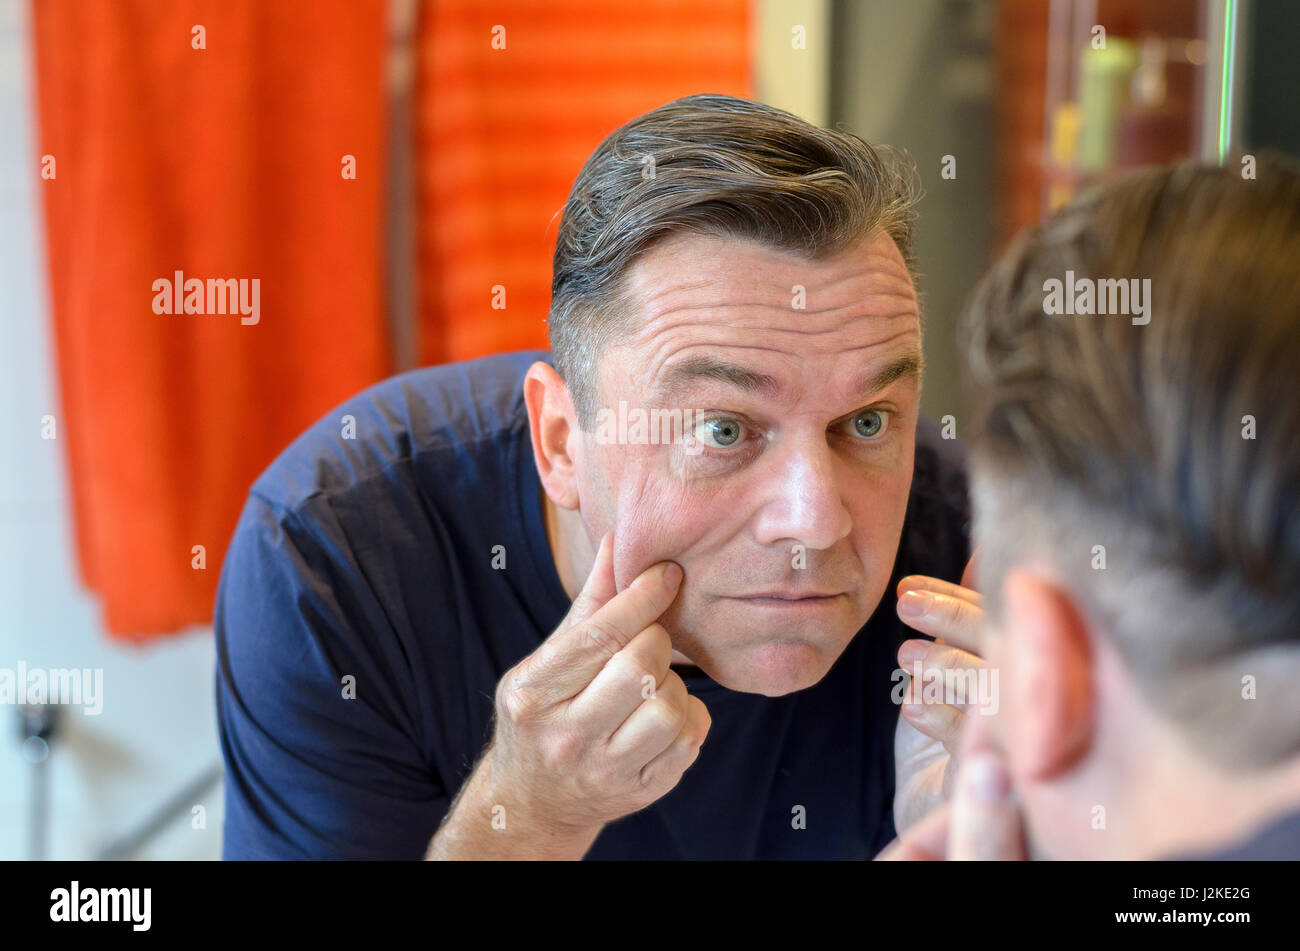 Middle aged caucasian man stands at mirror and pinches his face while wearing a blue shirt Stock Photo